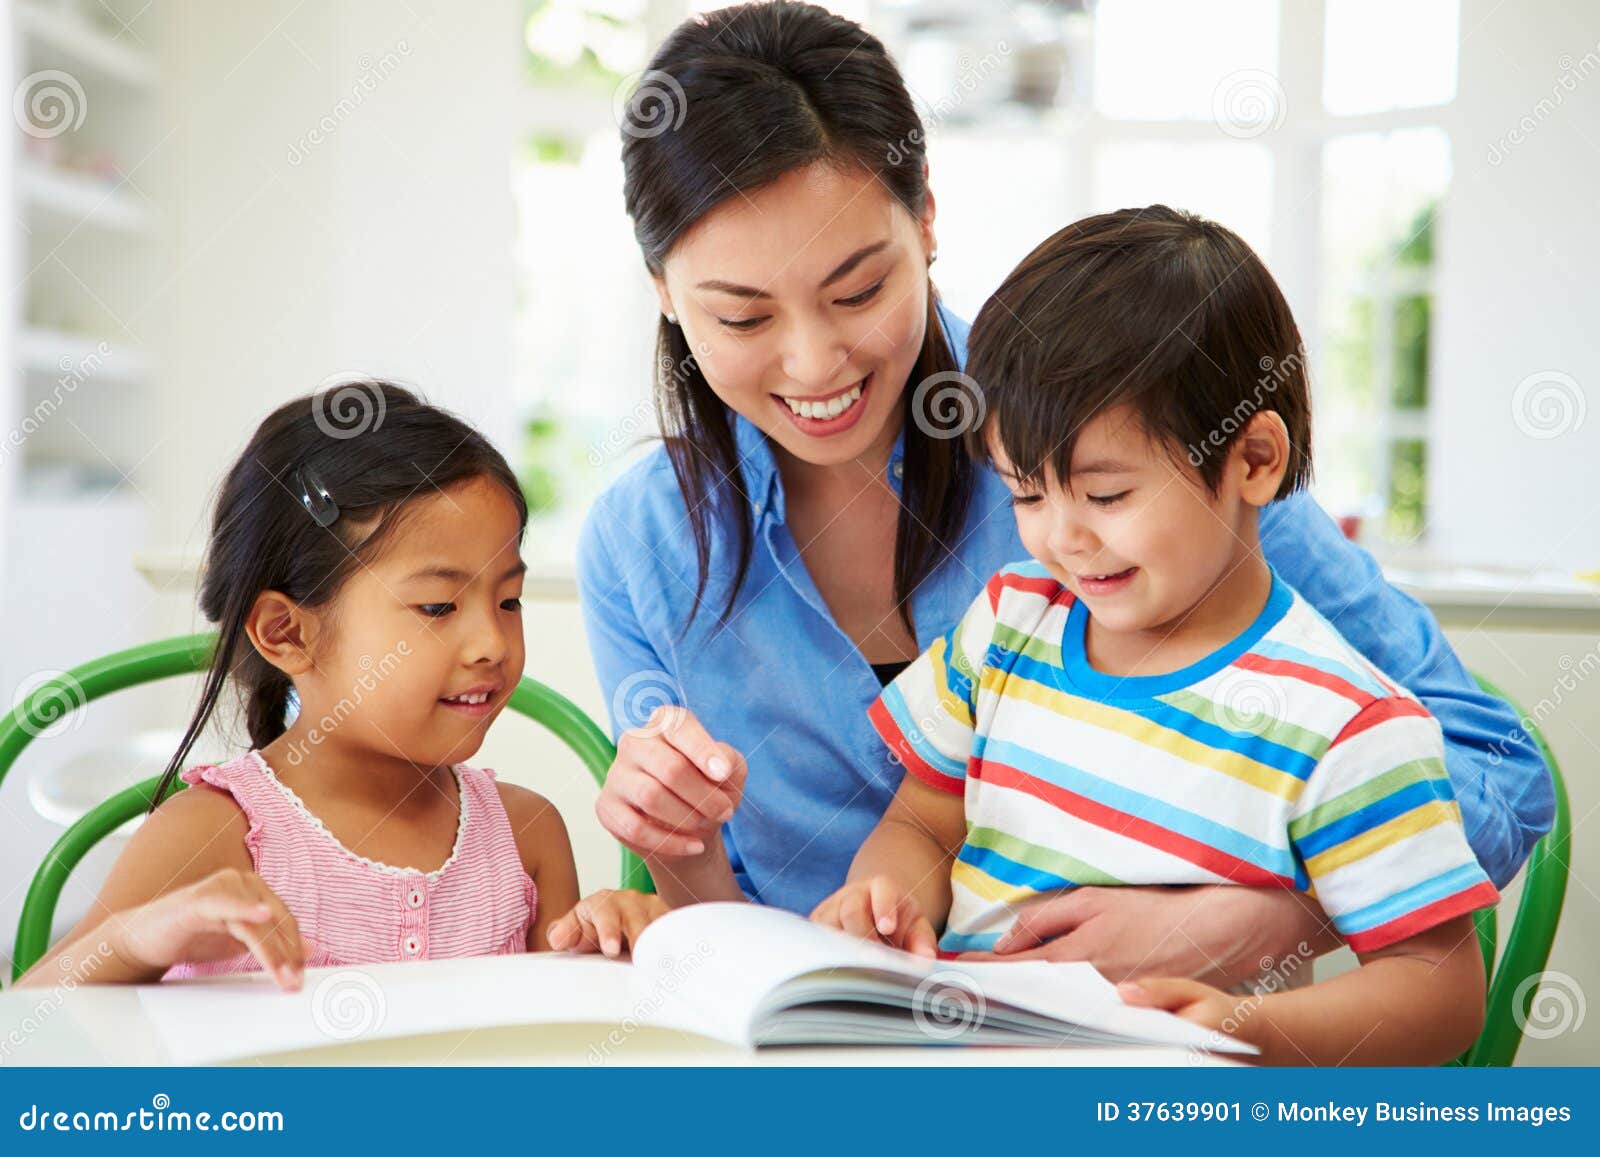 mother helping children with homework